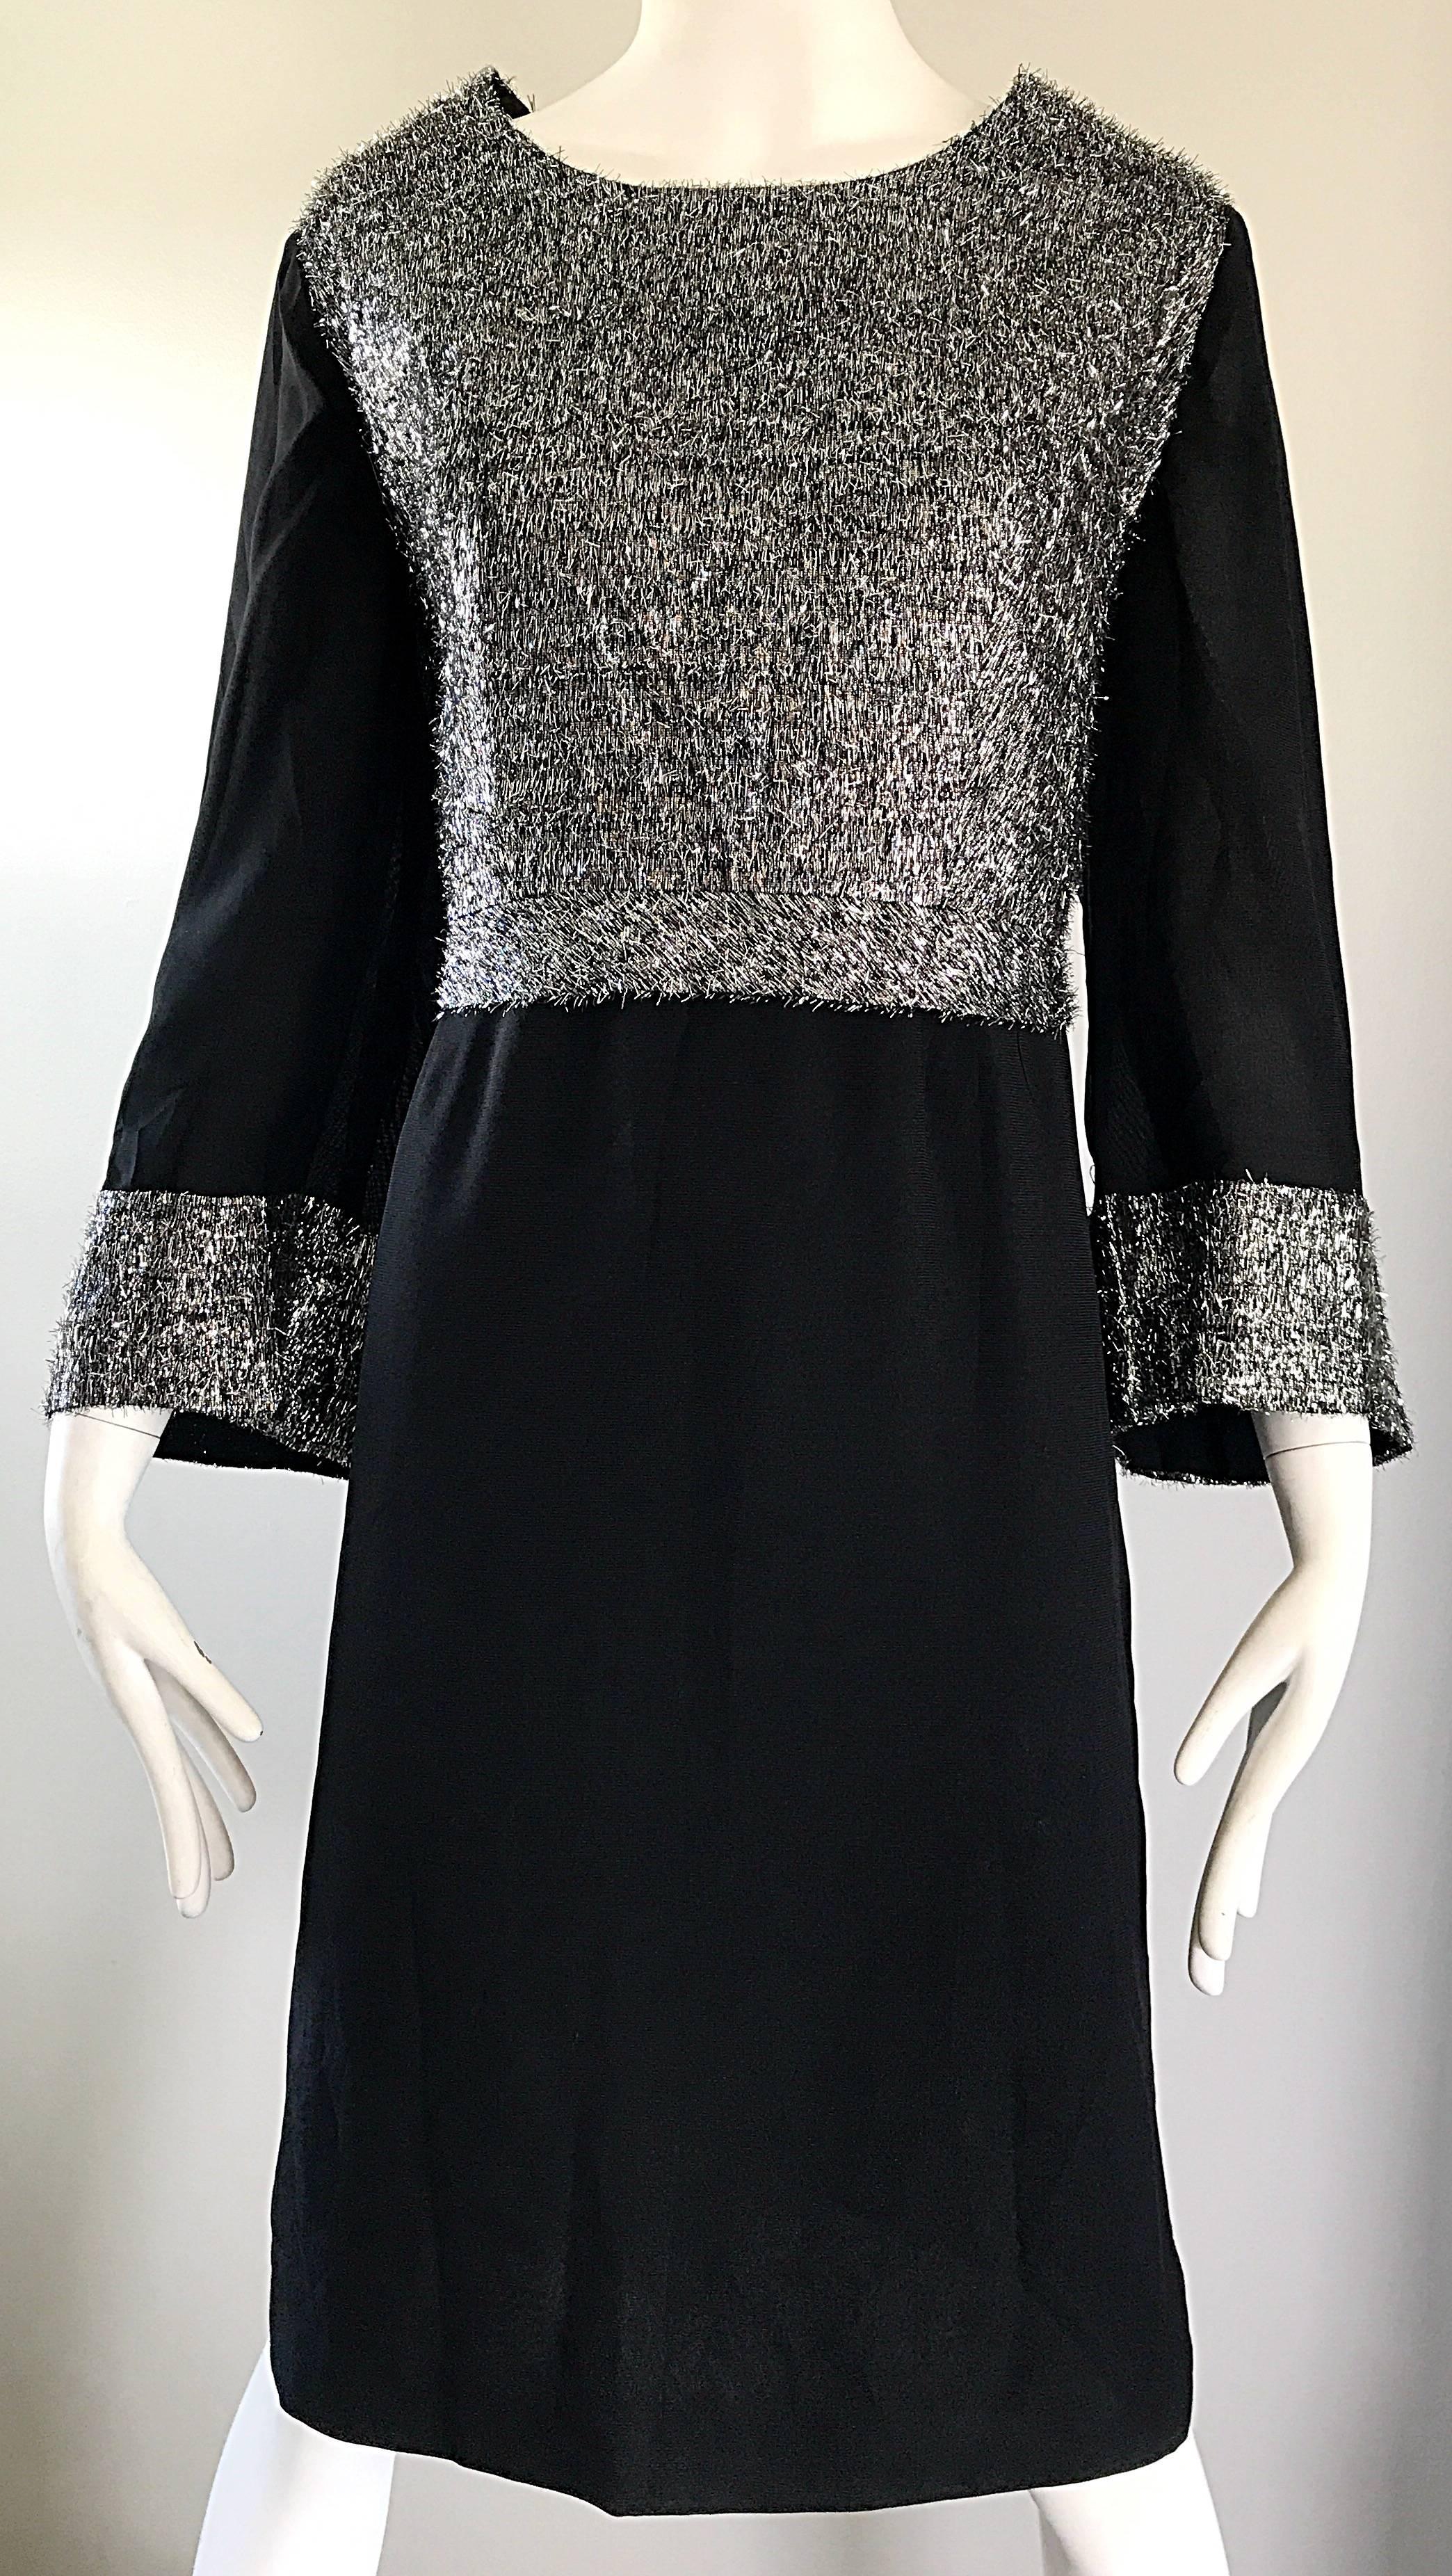 Women's Chic 1960s Plus Size 16 / 18 Silver + Black 60s Vintage Bell Sleeve Shift Dress For Sale